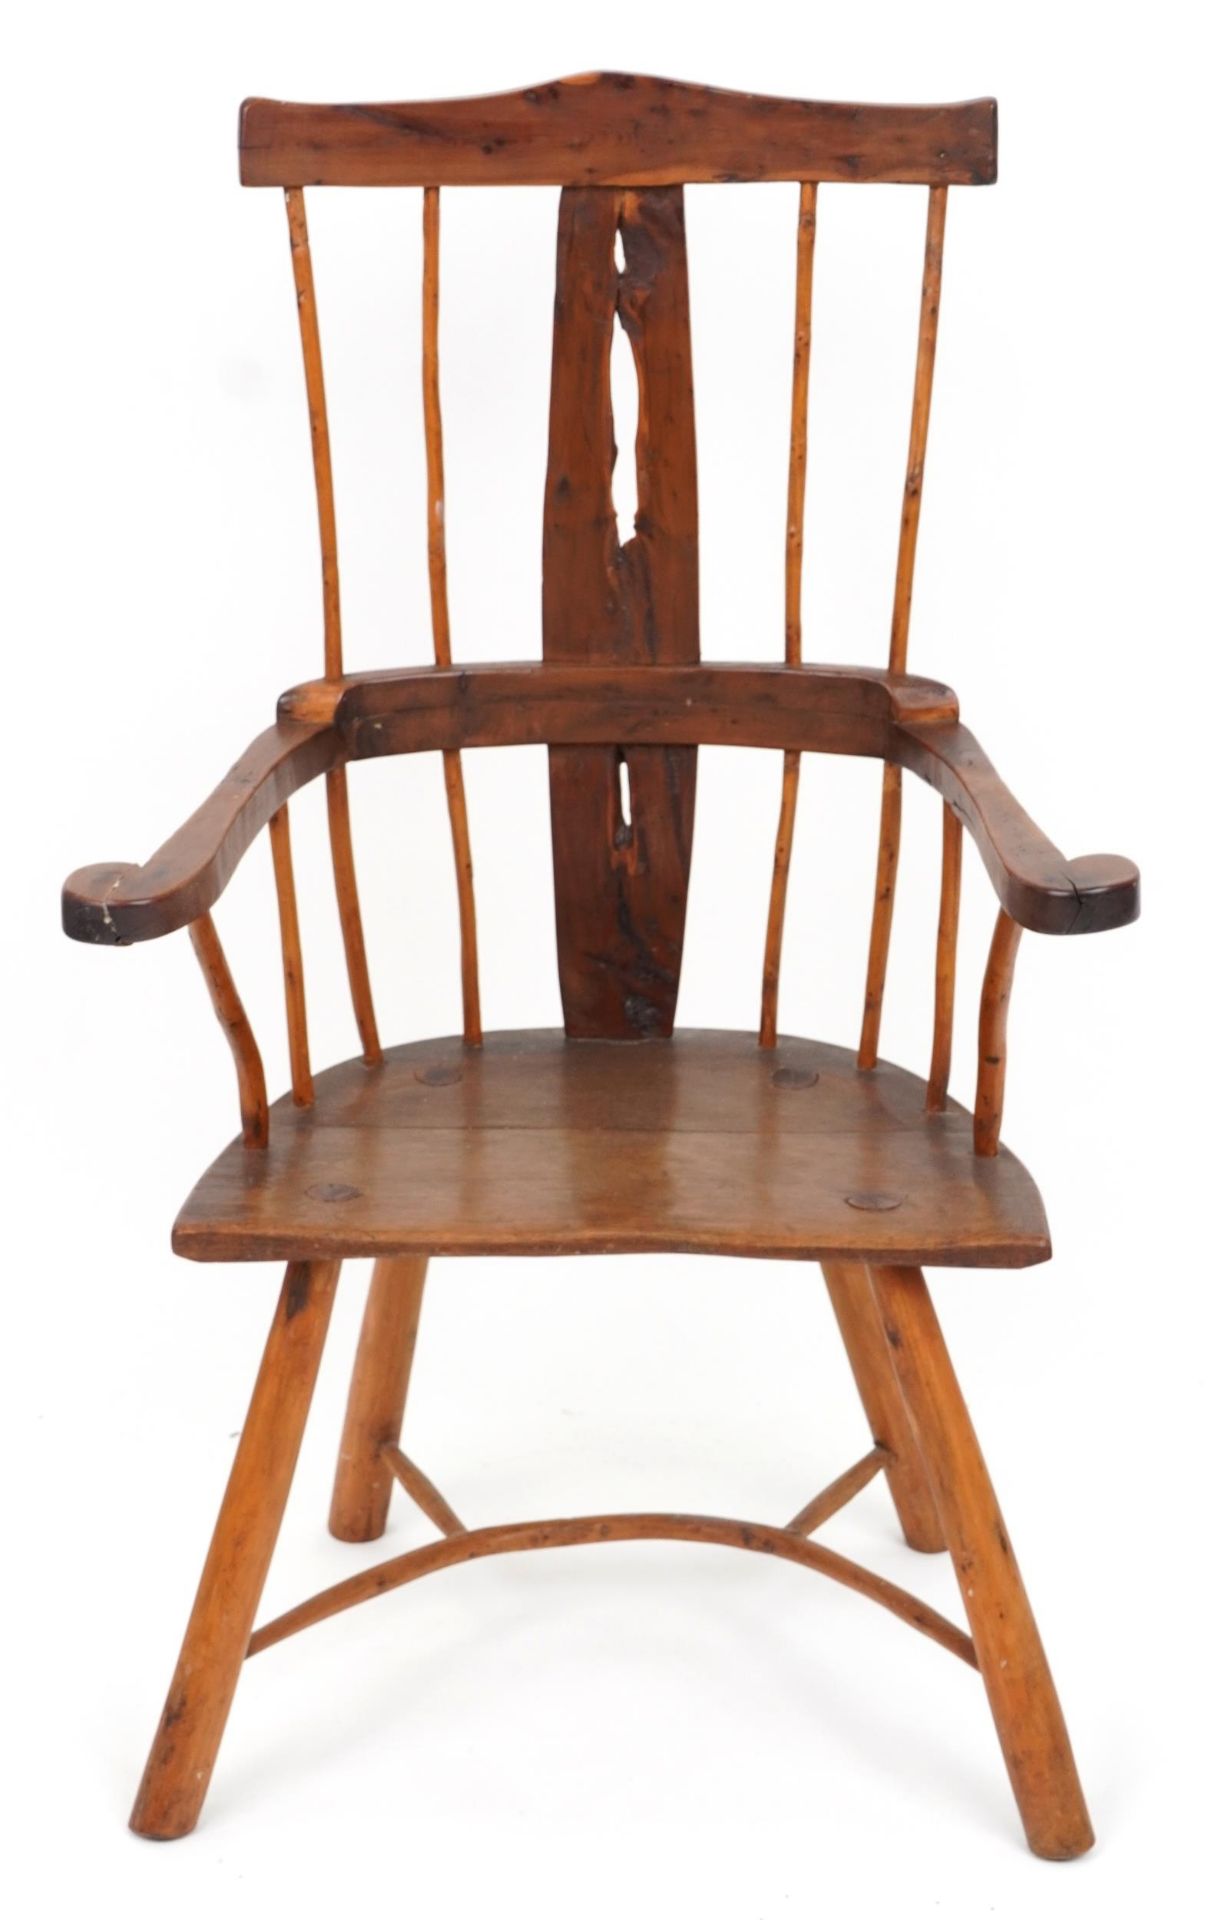 Antique country spindle back chair with pierced splat, 101cm high - Image 2 of 4